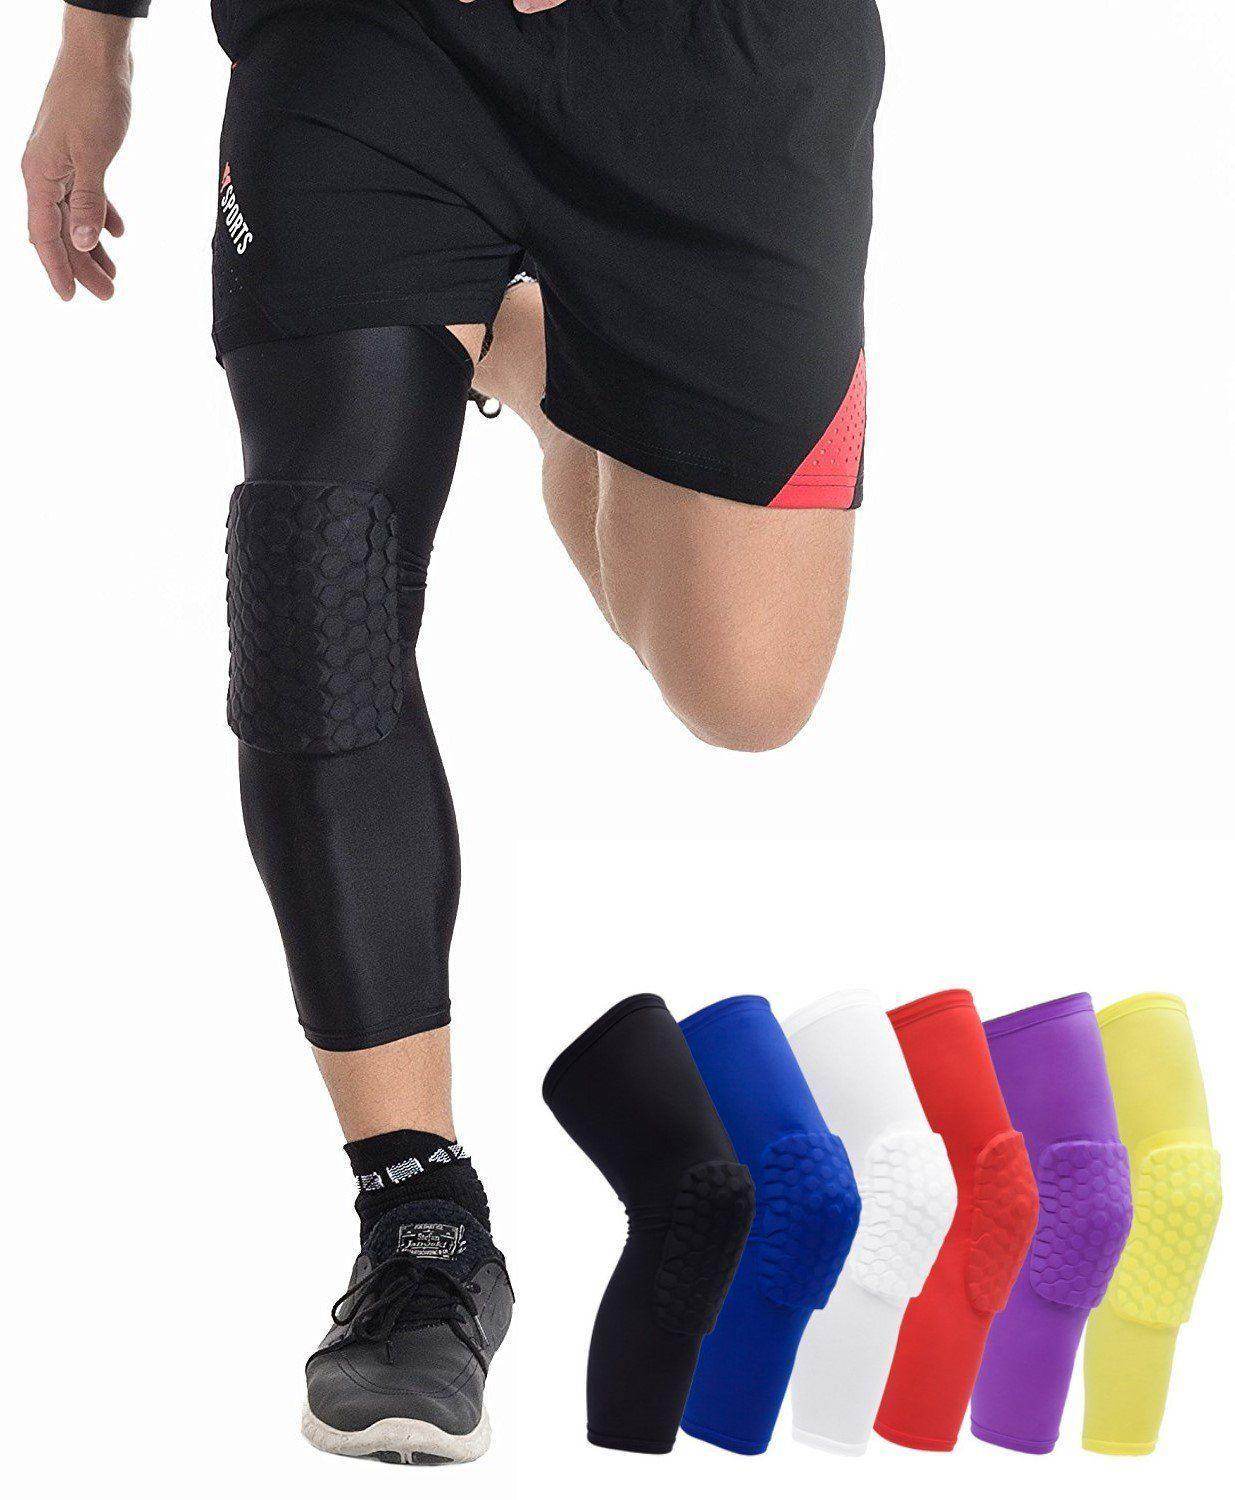 Compression Knee Sleeve Padded Leg Support HoneyComb Pad – Best ...